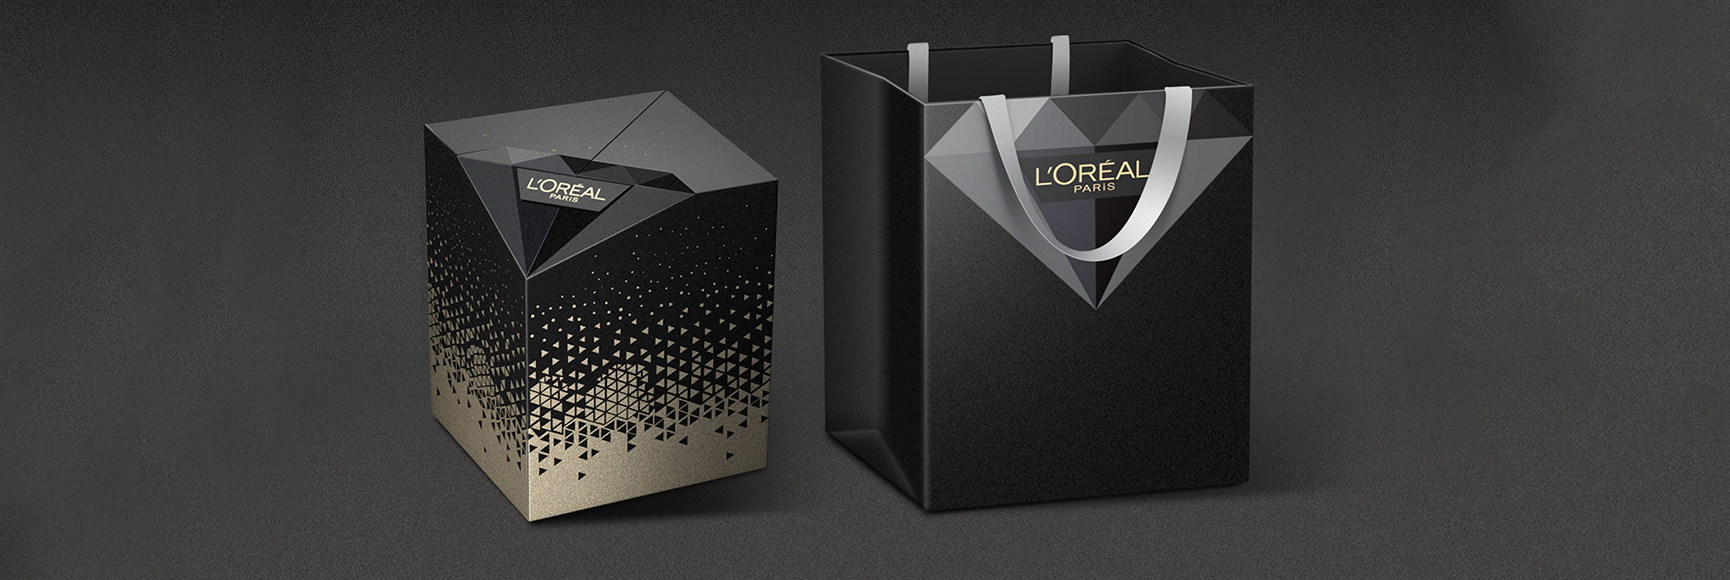 L’Oréal’s Age Perfect deluxe skincare PR Giftset Packaging Design Featured Image